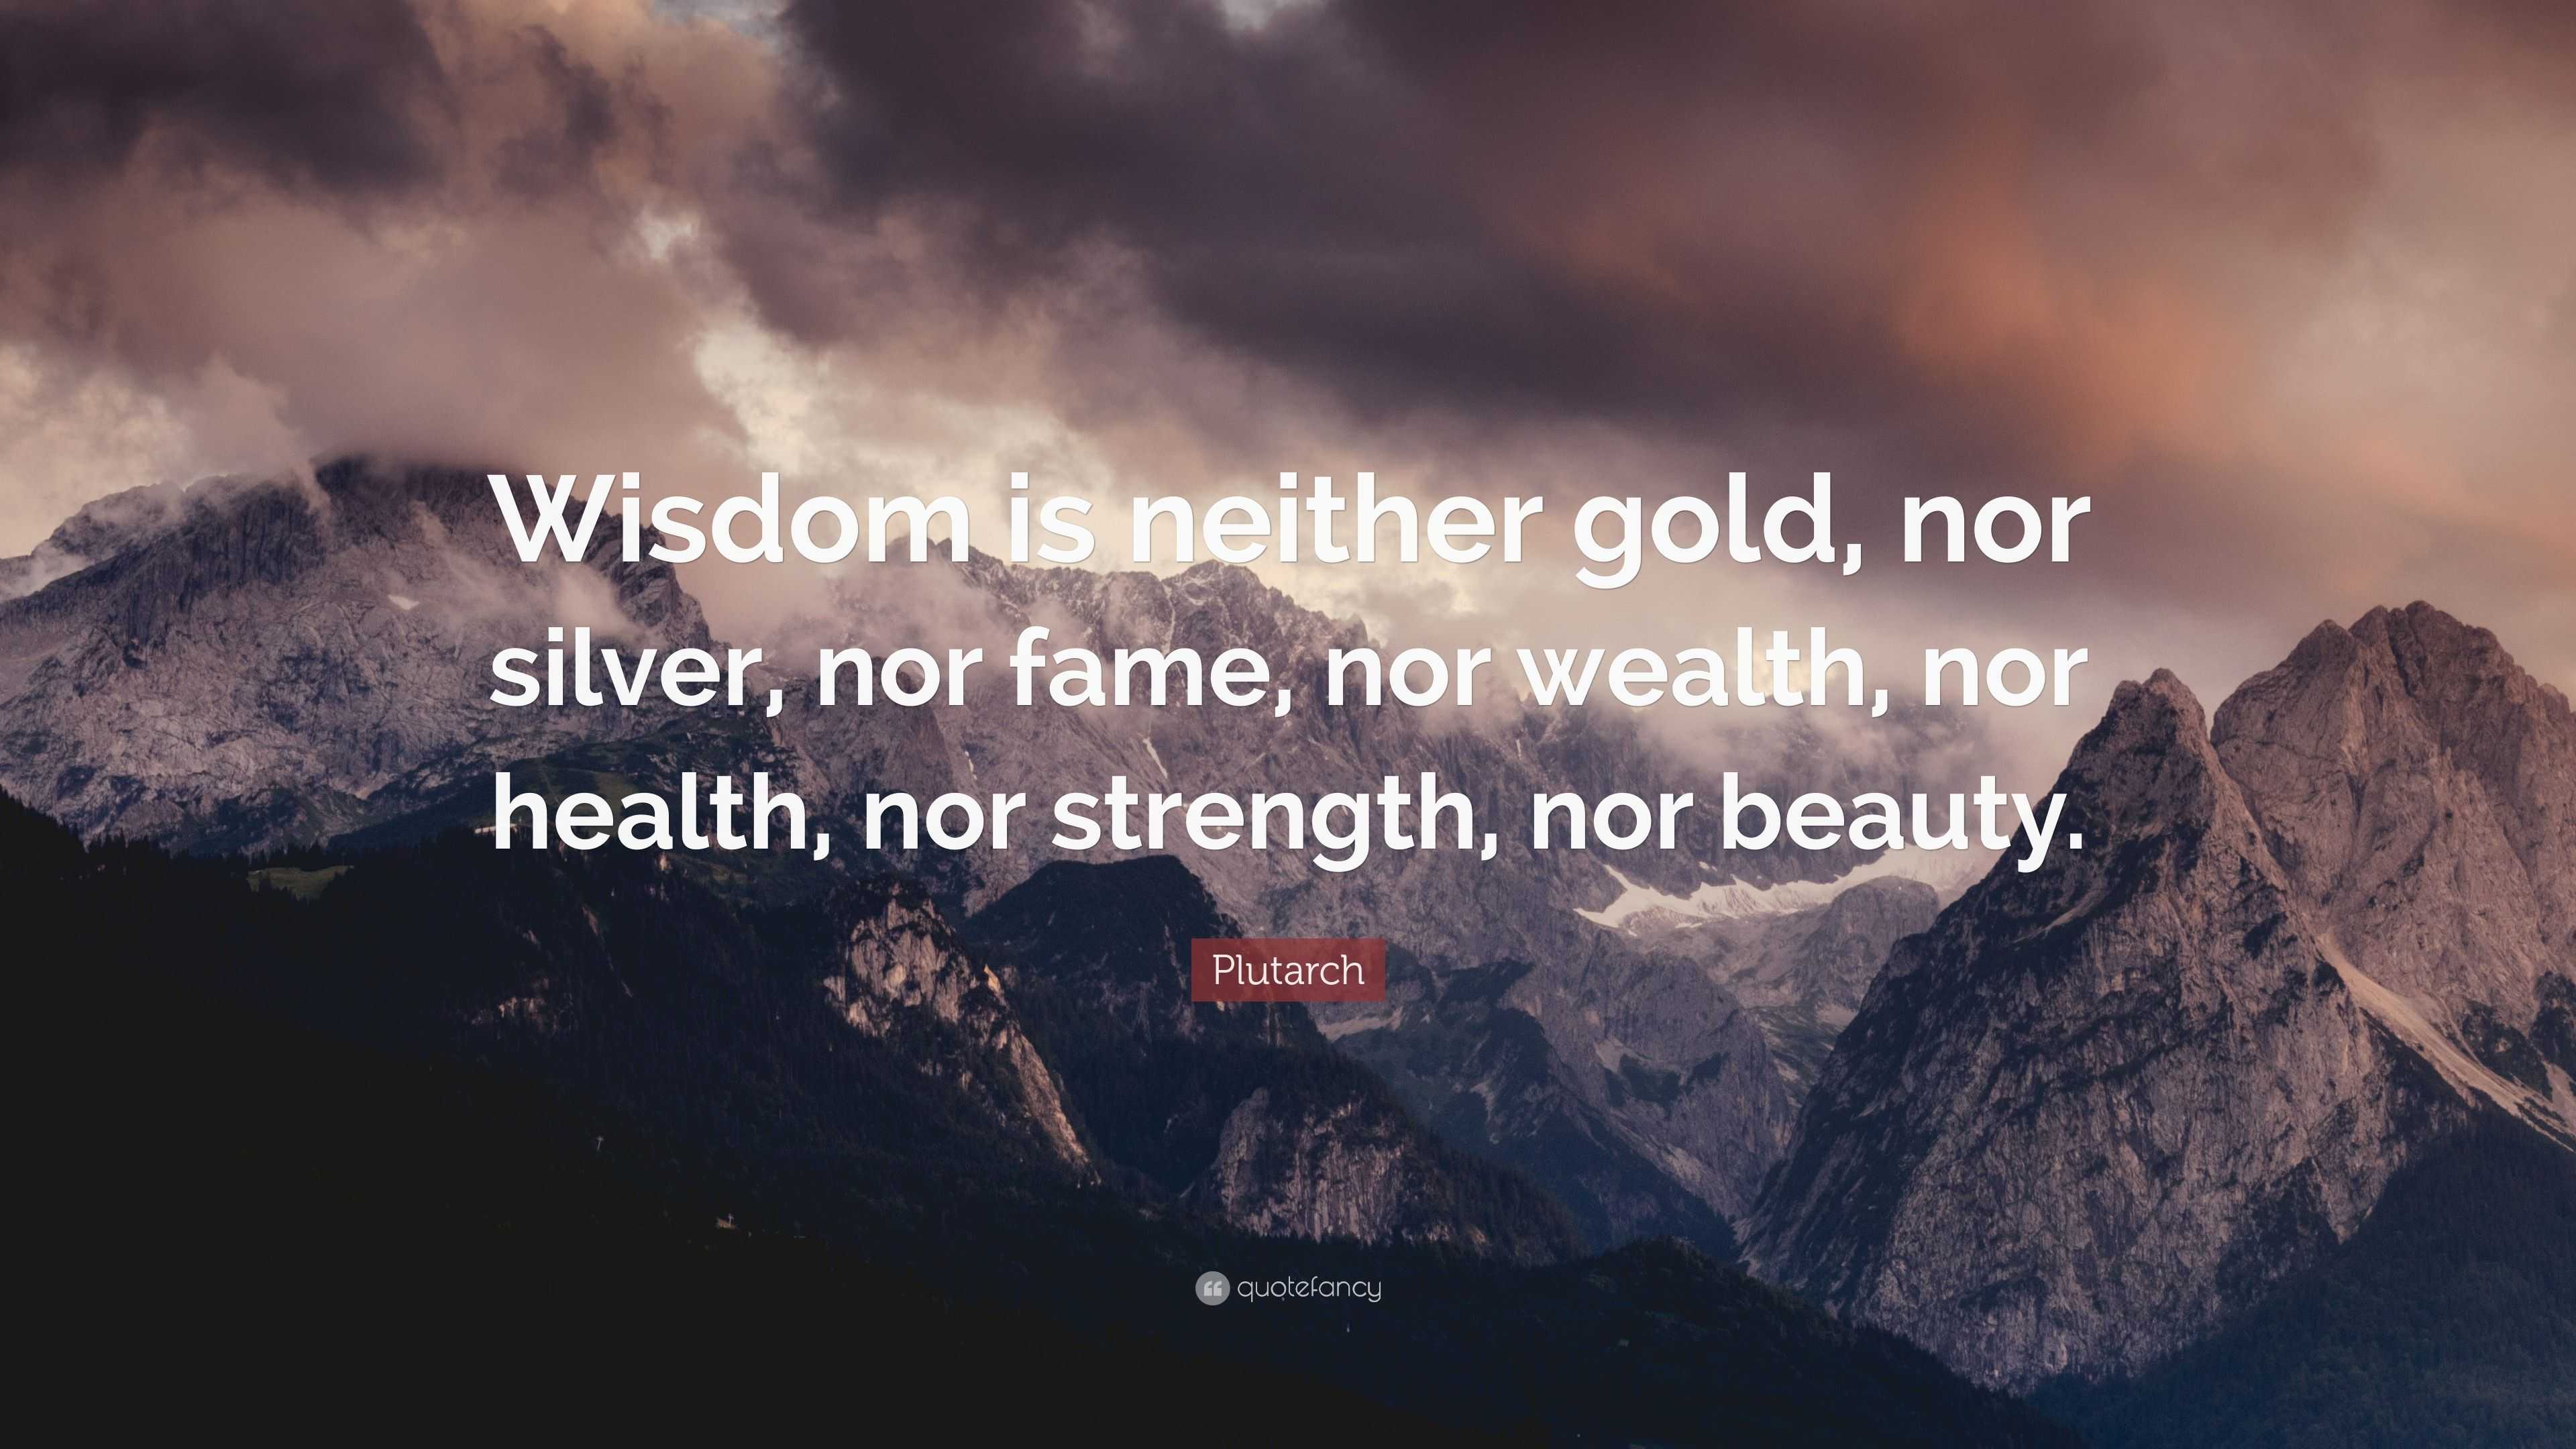 Plutarch quote: Wisdom is neither gold, nor silver, nor fame, nor wealth